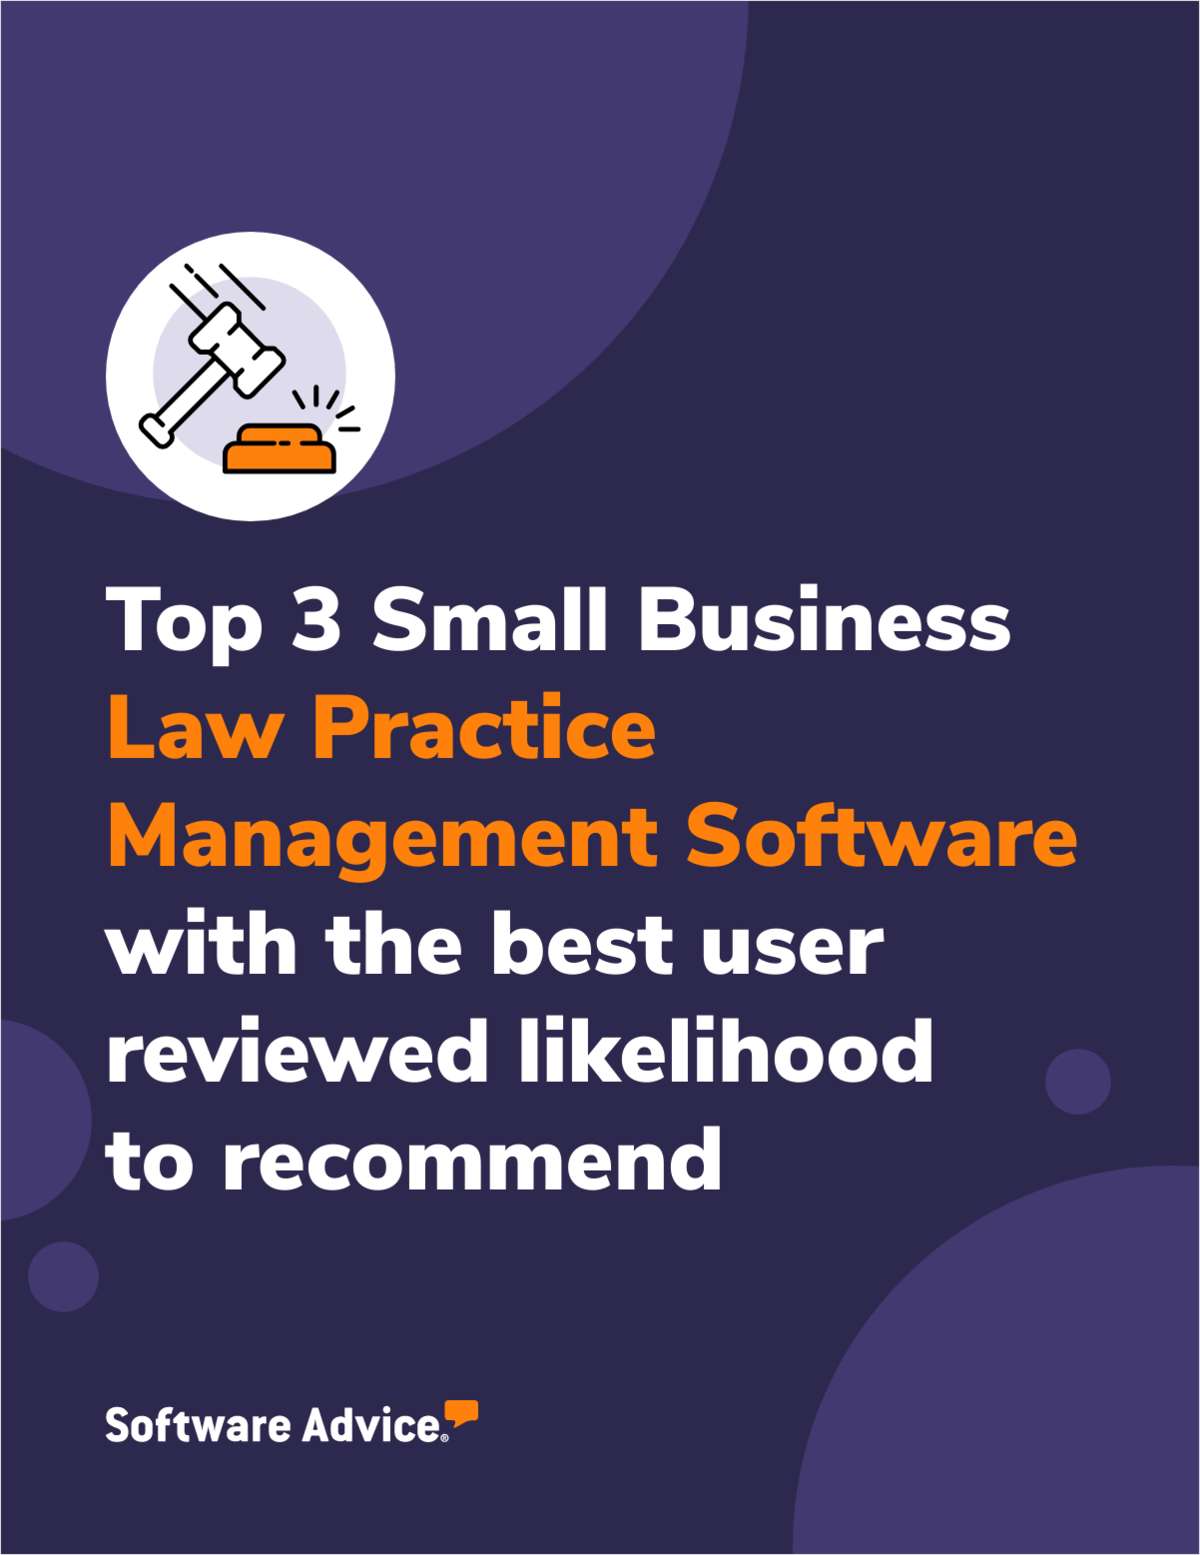 Top 3 Small Business Law Practice Management Software With the Best User Reviewed Likelihood to Recommend